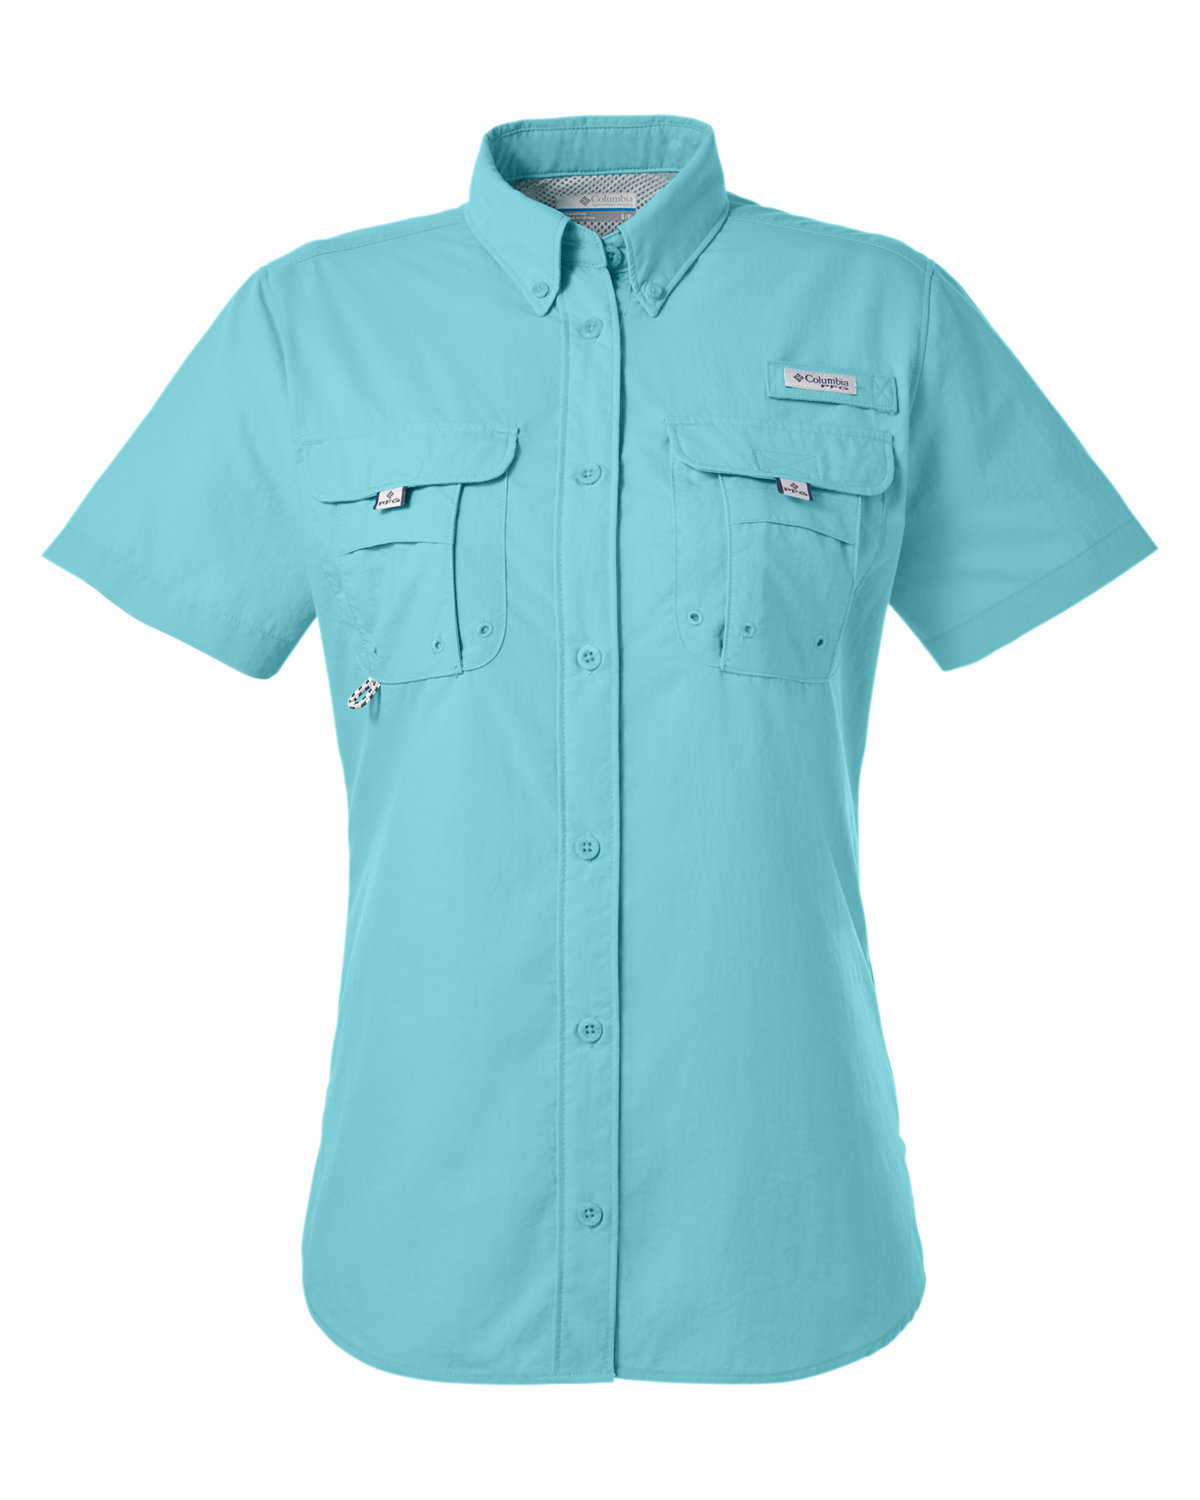 Columbia Shirt Mens Large Blue PFG Button Up Short Sleeve Embroidered Back  Vent